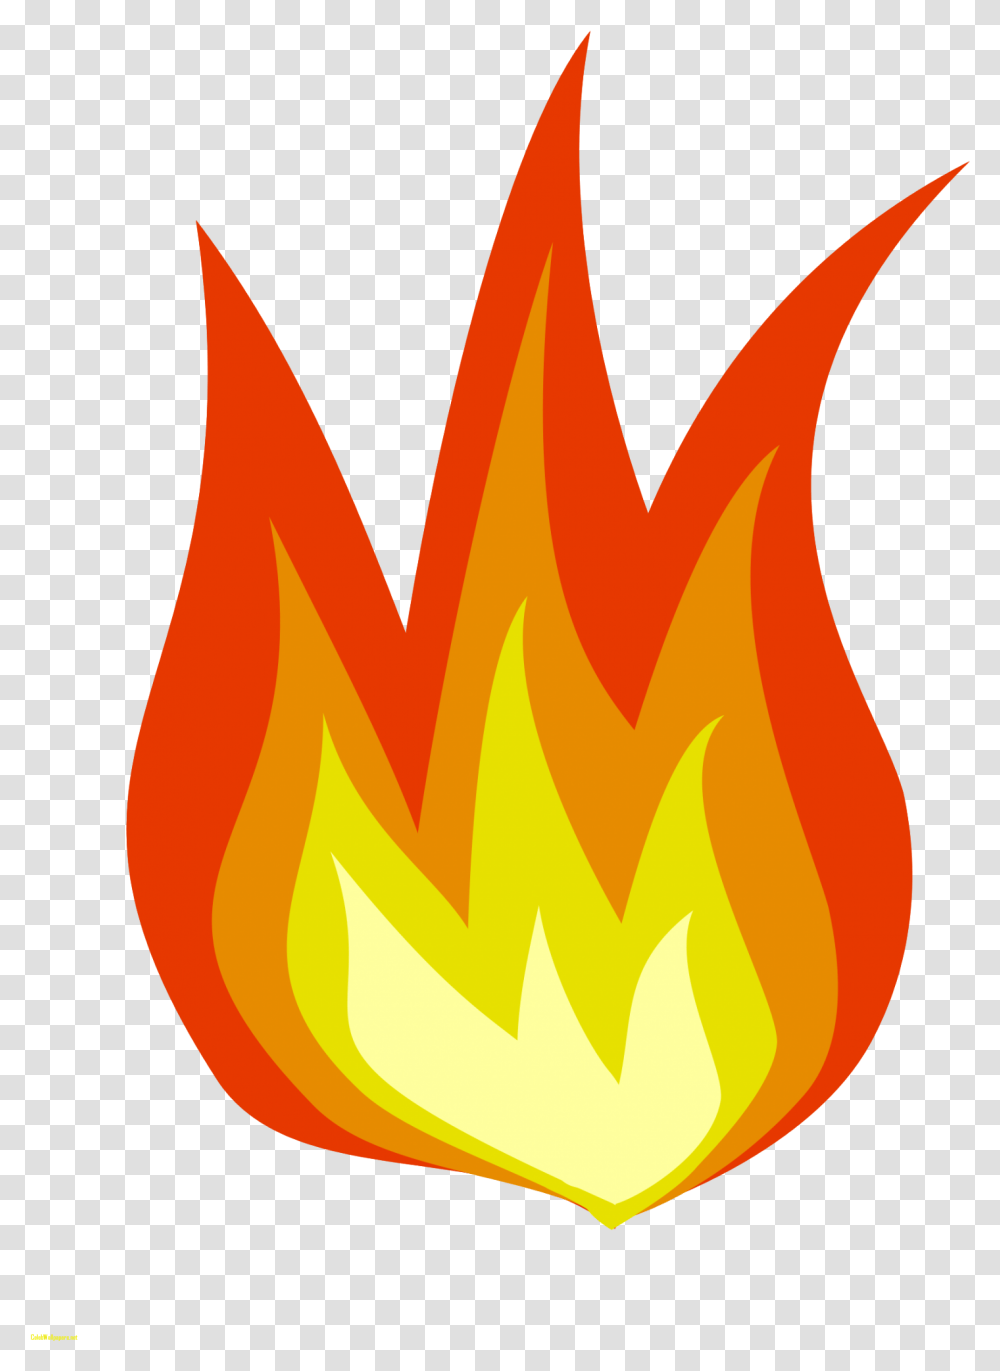 Images Of Fire Lovely Free Fire Free Download Clip Fire Clip Art, Flame, Food, Bonfire Transparent Png